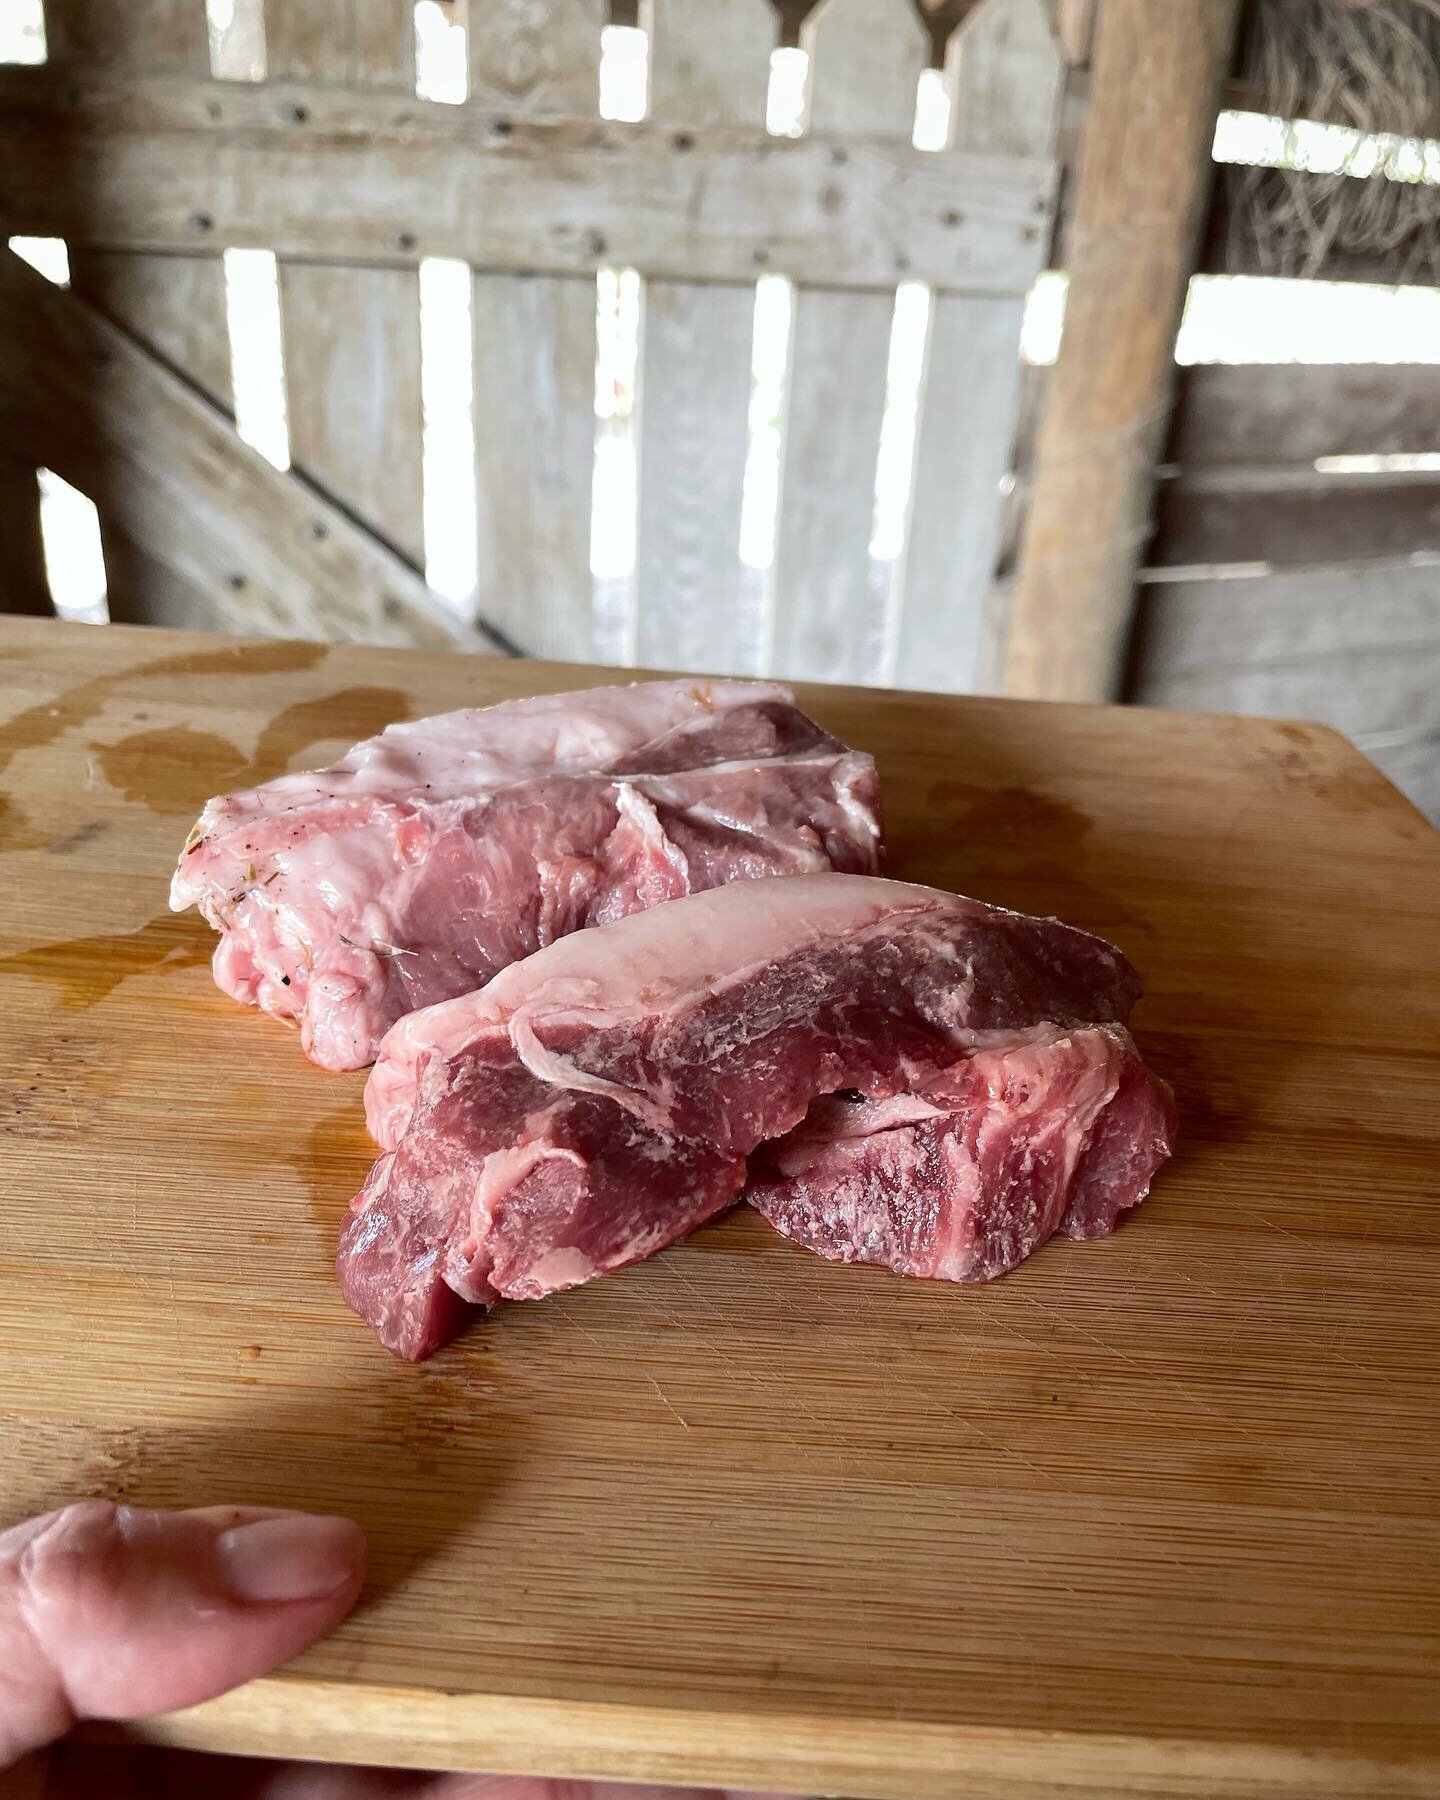 Just a few pics of our Mangalitsa pork chops! Bone in or boneless or Tomahawk! We also have pork roasts, ribs and sausages. And we still have chicken!
2 ways to get this delicious pasture raised meat:
1. Get it delivered tomorrow. Yep&mdash;we&rsquo;